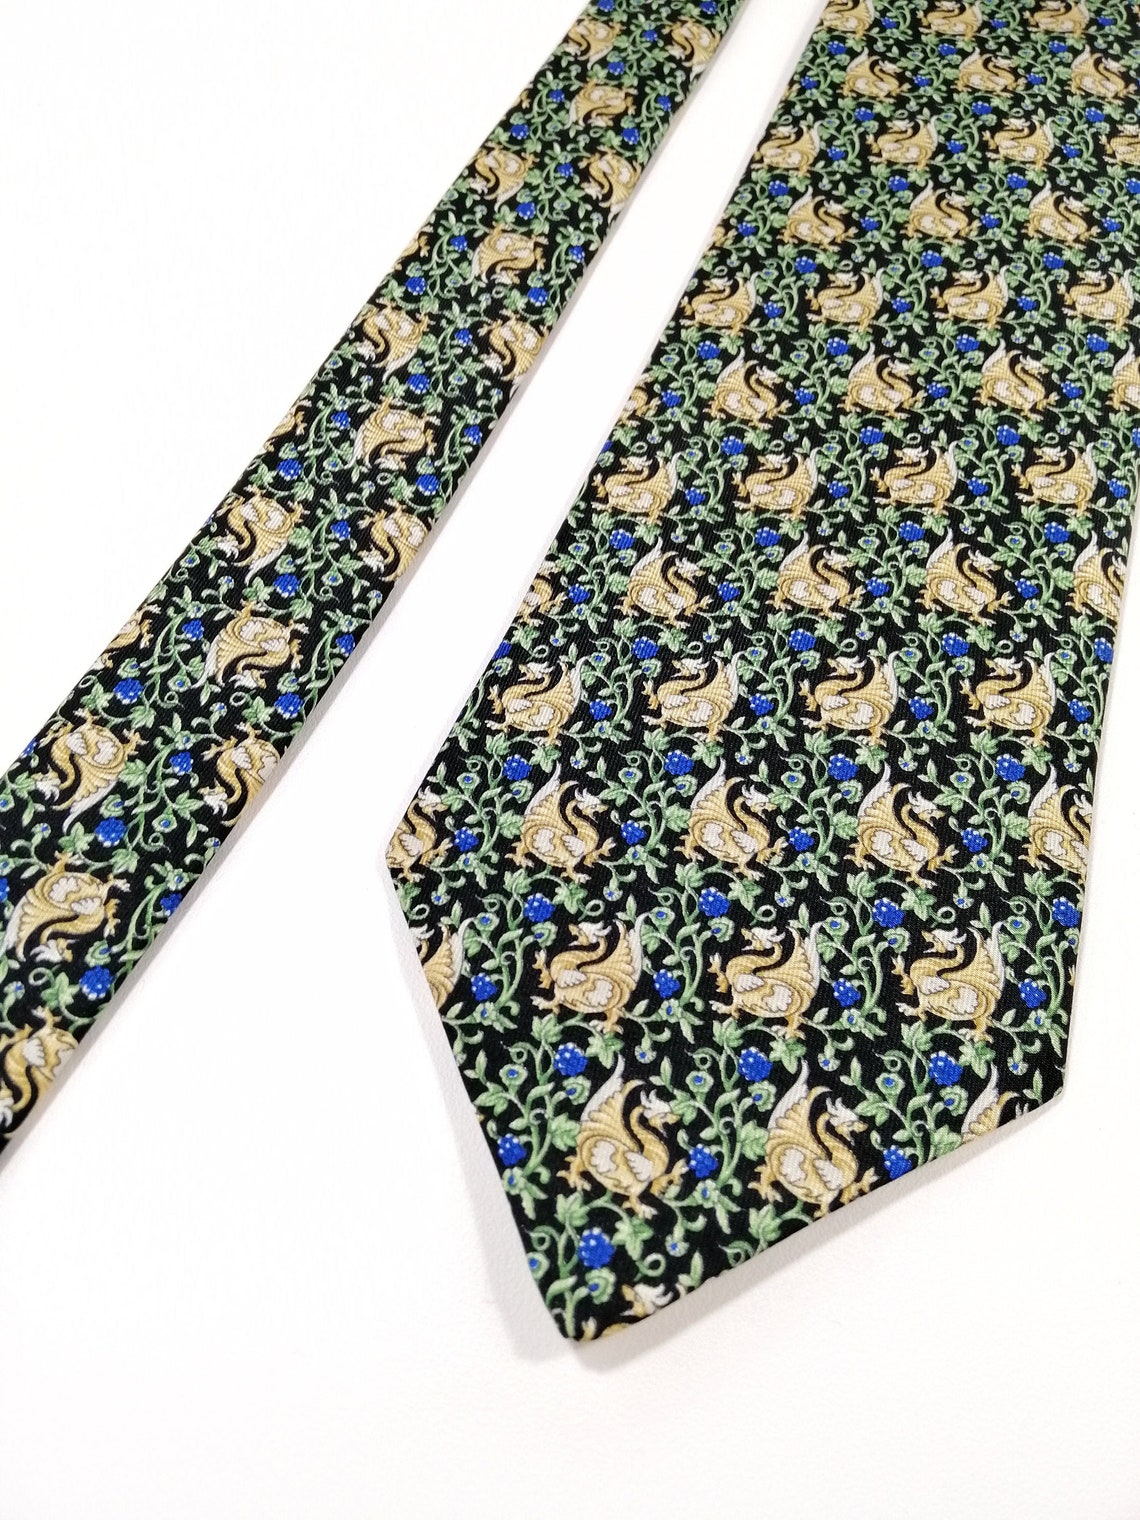 Mens medieval monster tie w blackberry and green floral | Etsy